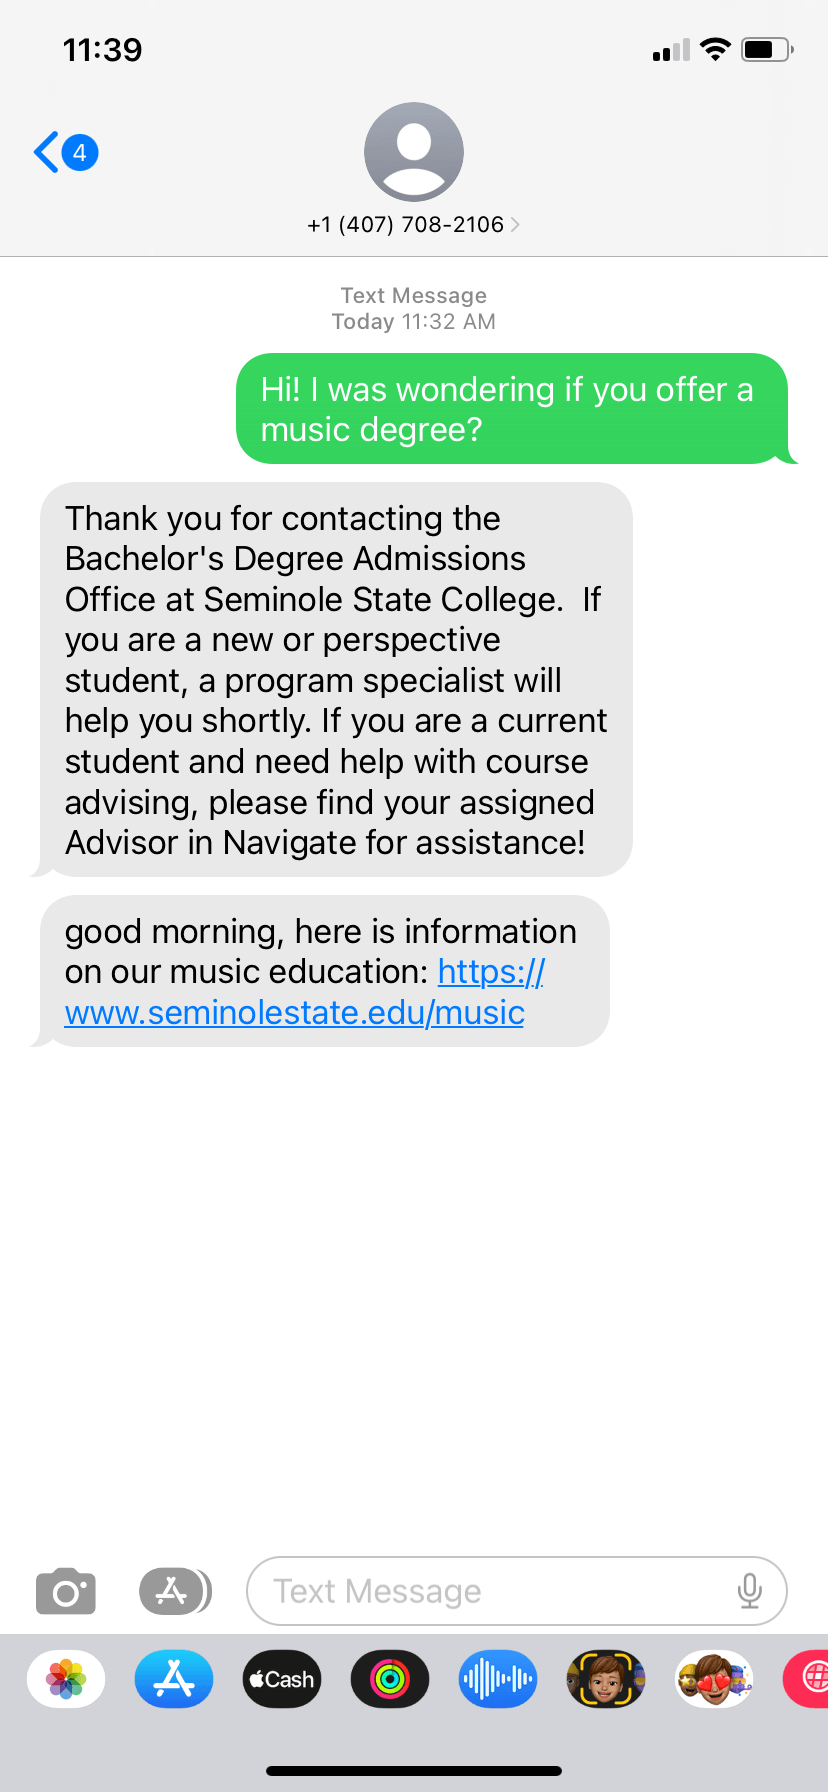 Screenshot of an initial text that says “Hi! I was wondering if you offer a music degree?” and a response that says “good morning, her is information on our music education: https://www.seminolestate.edu/music”